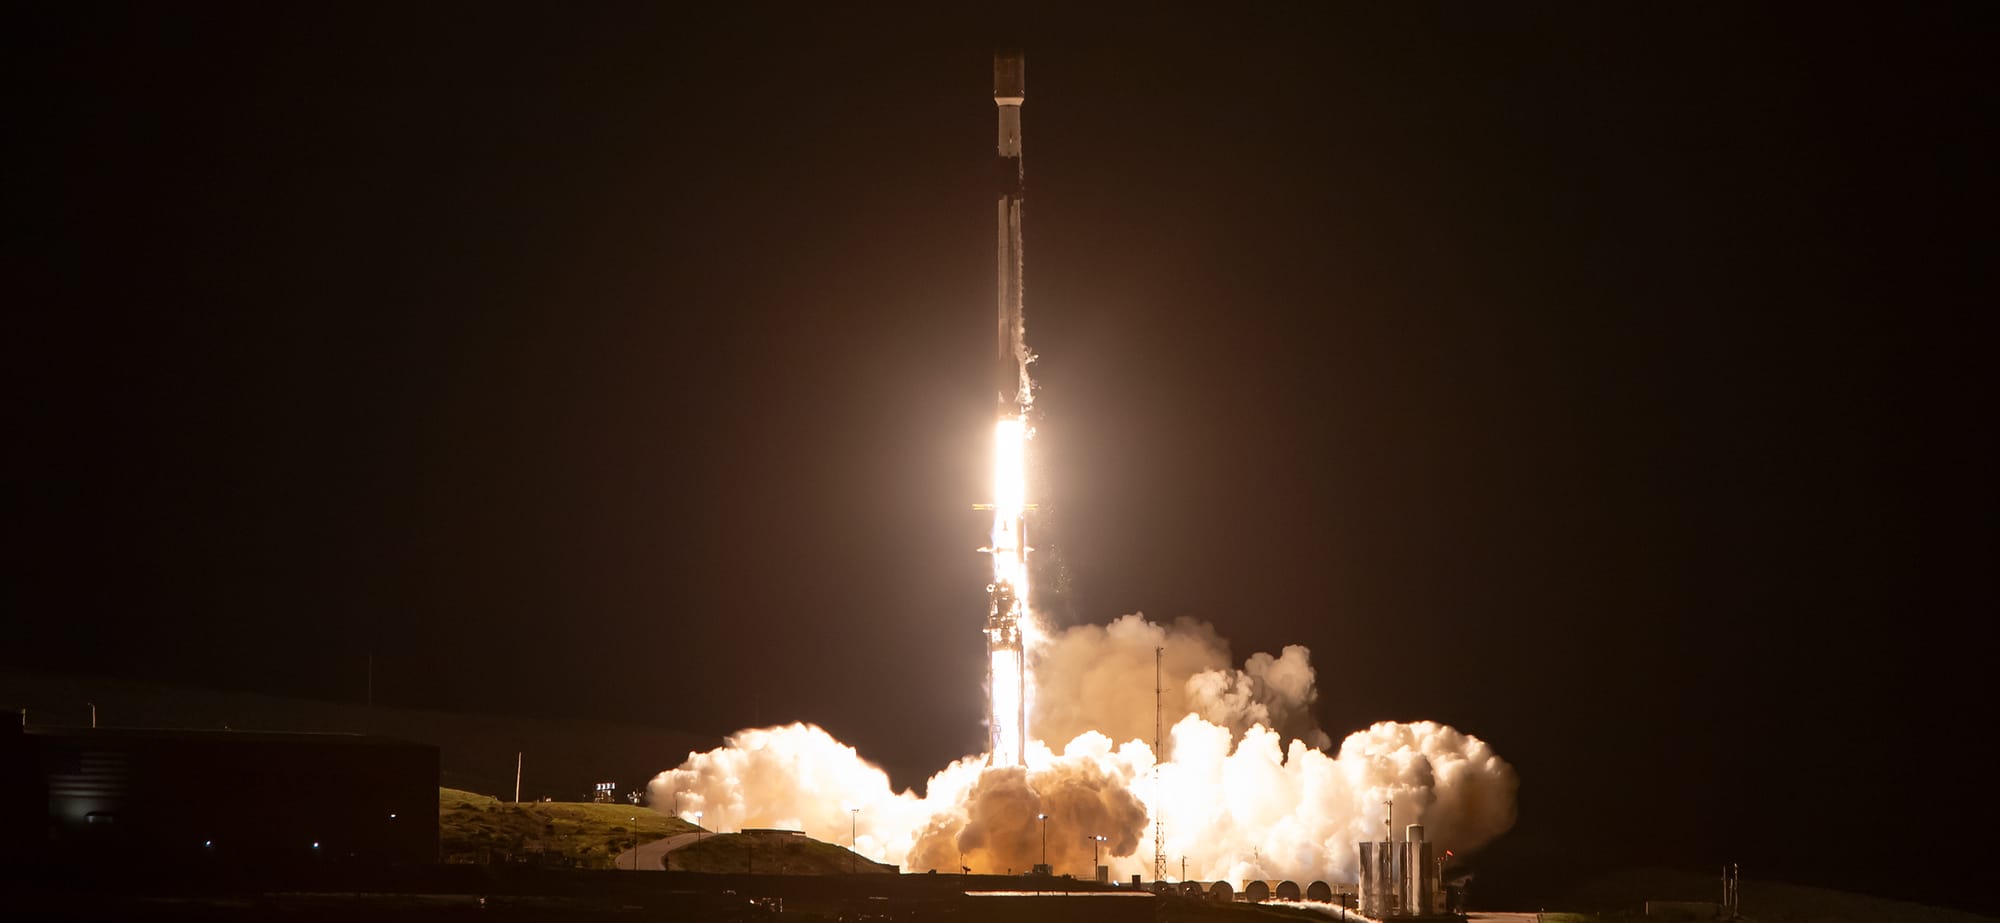 Falcon 9 lifting off from Space Launch Complex 4E. ©SpaceX